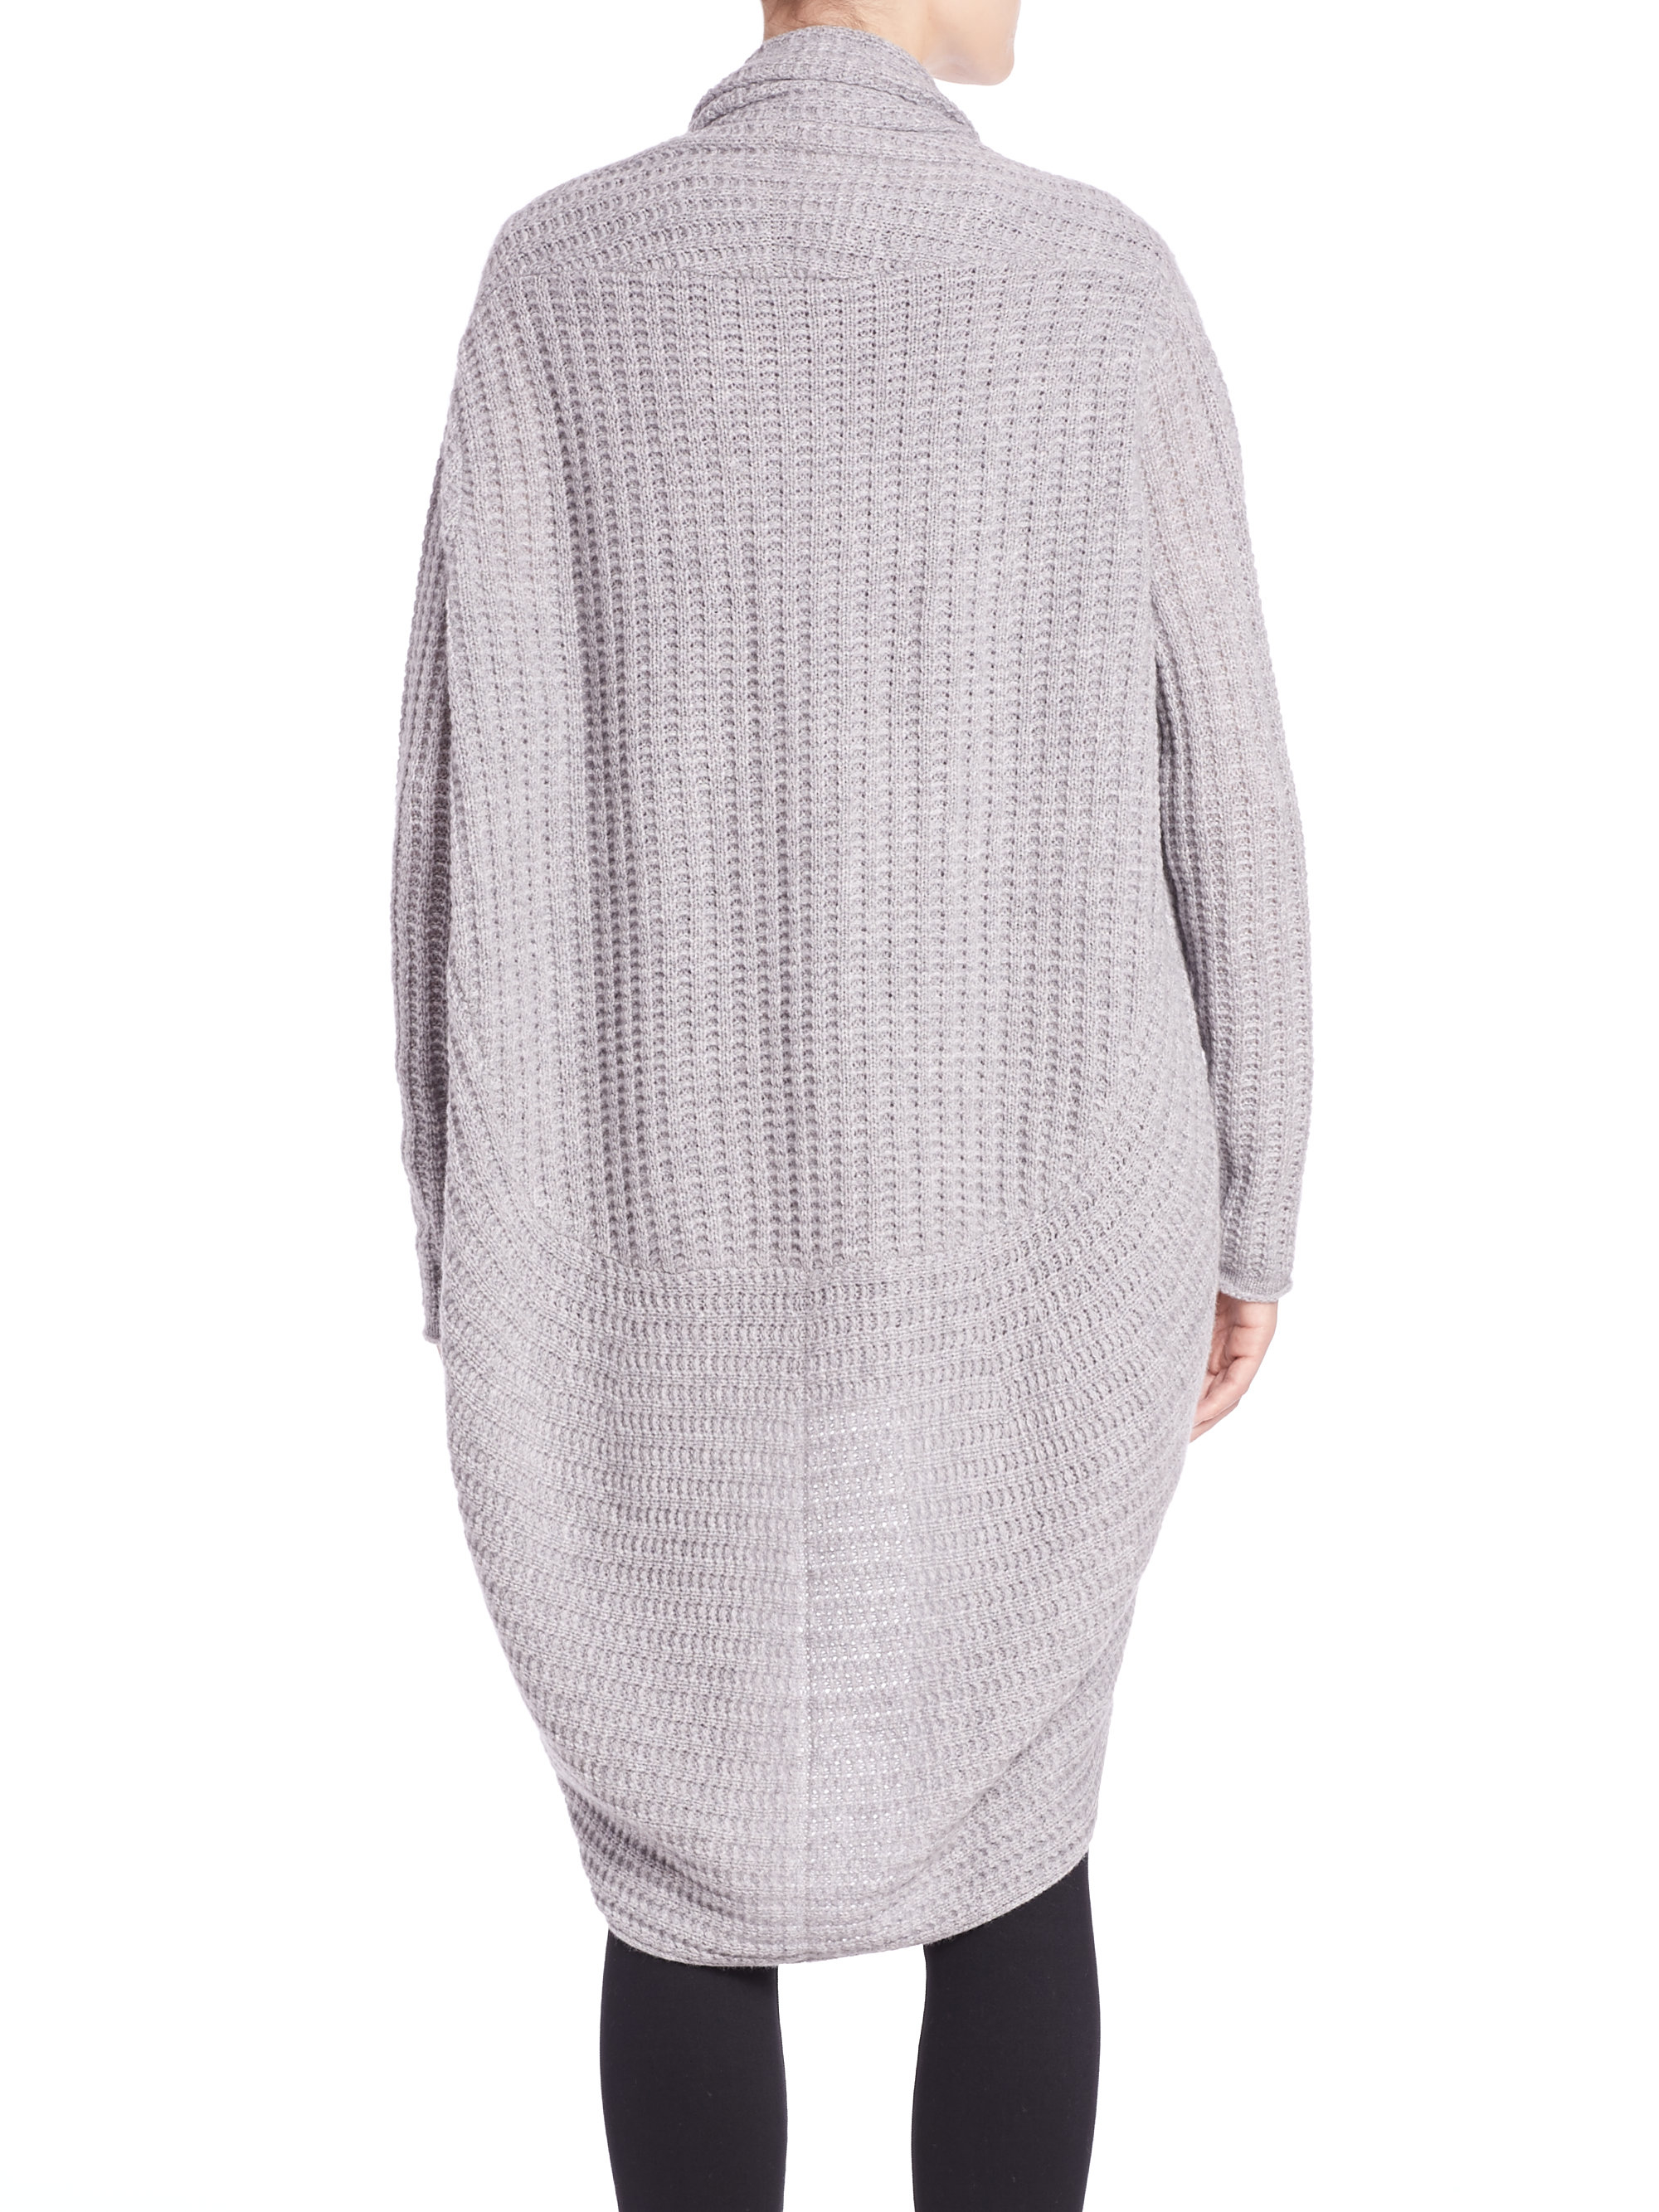 Lyst - 360Cashmere Josephine Cashmere Cocoon Sweater in Gray